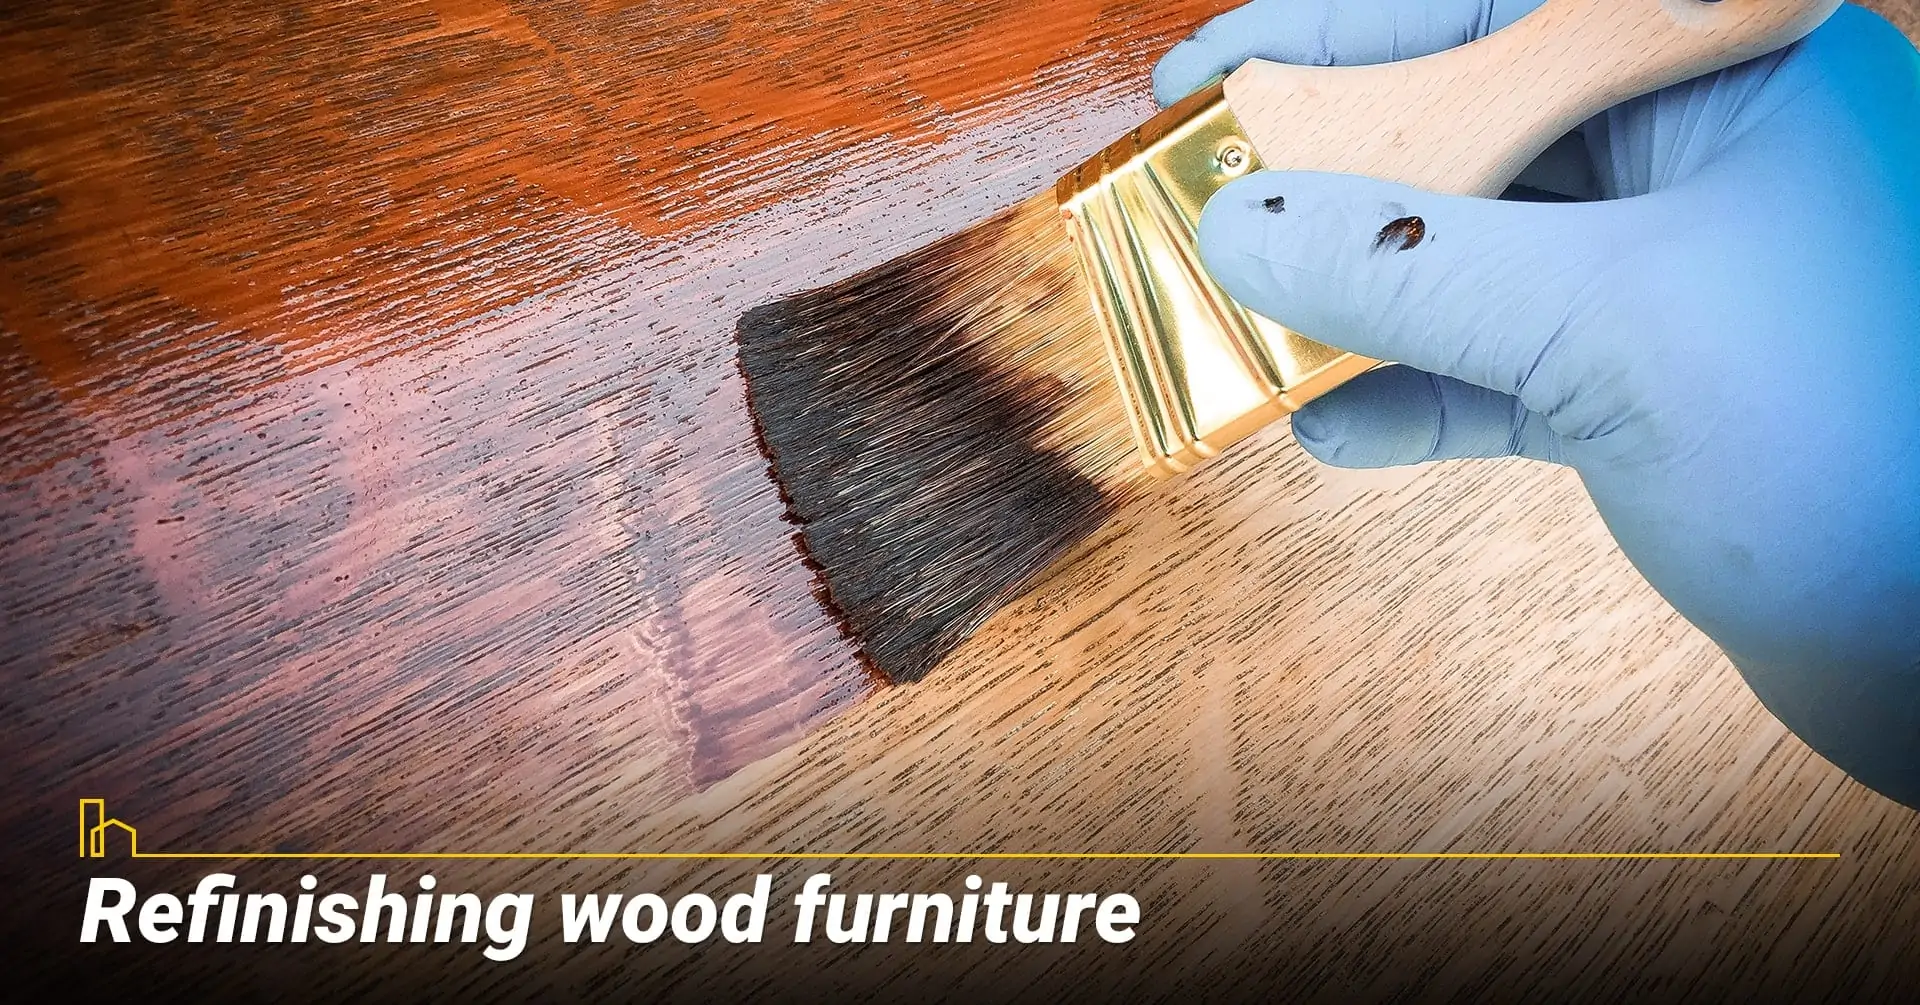 Refinishing wood furniture, give your furniture a new coat of paint